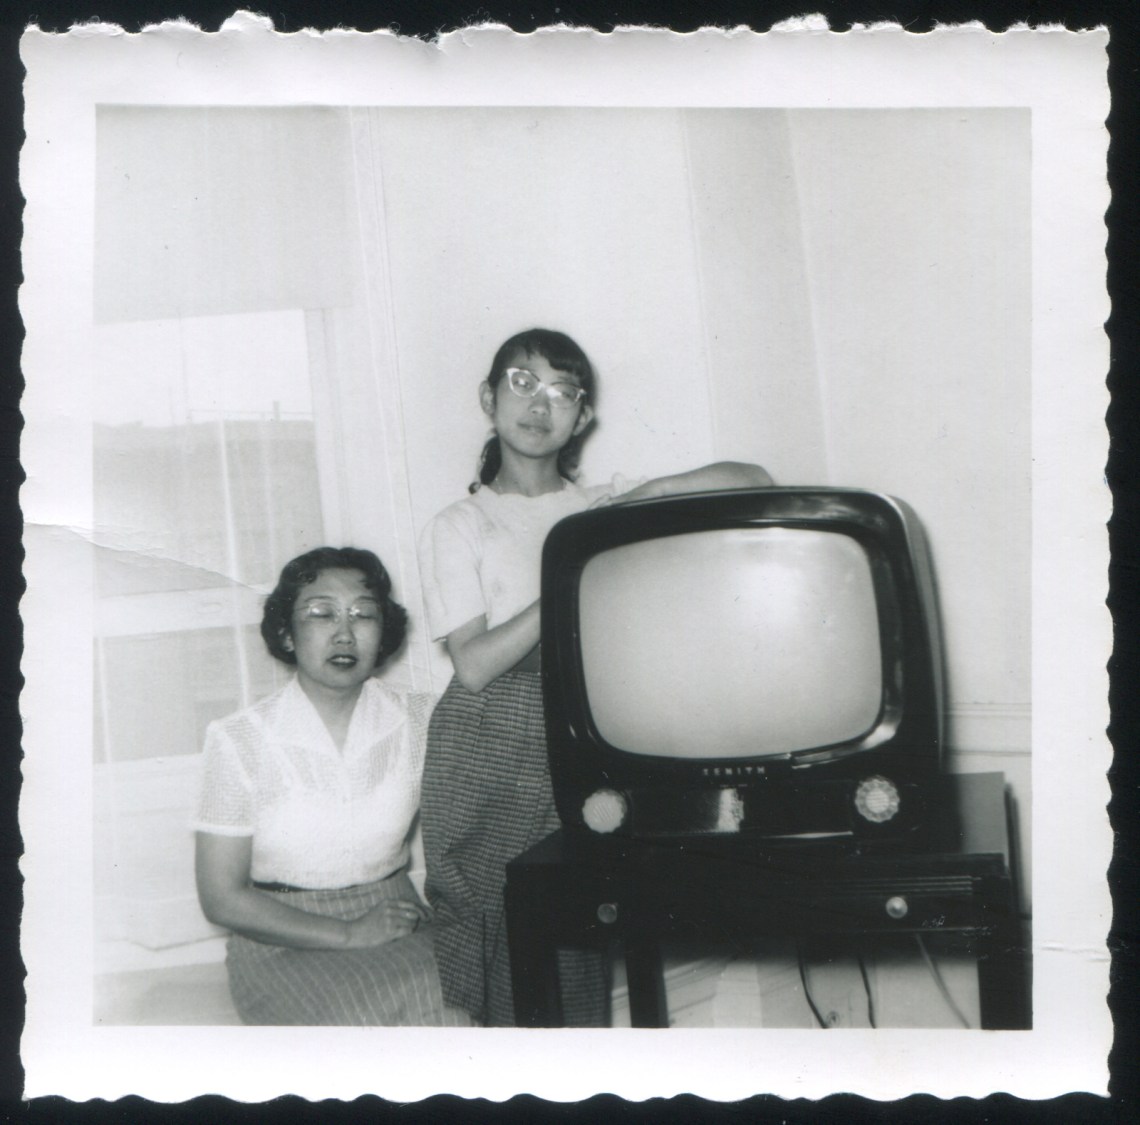 Two young people next to a TV